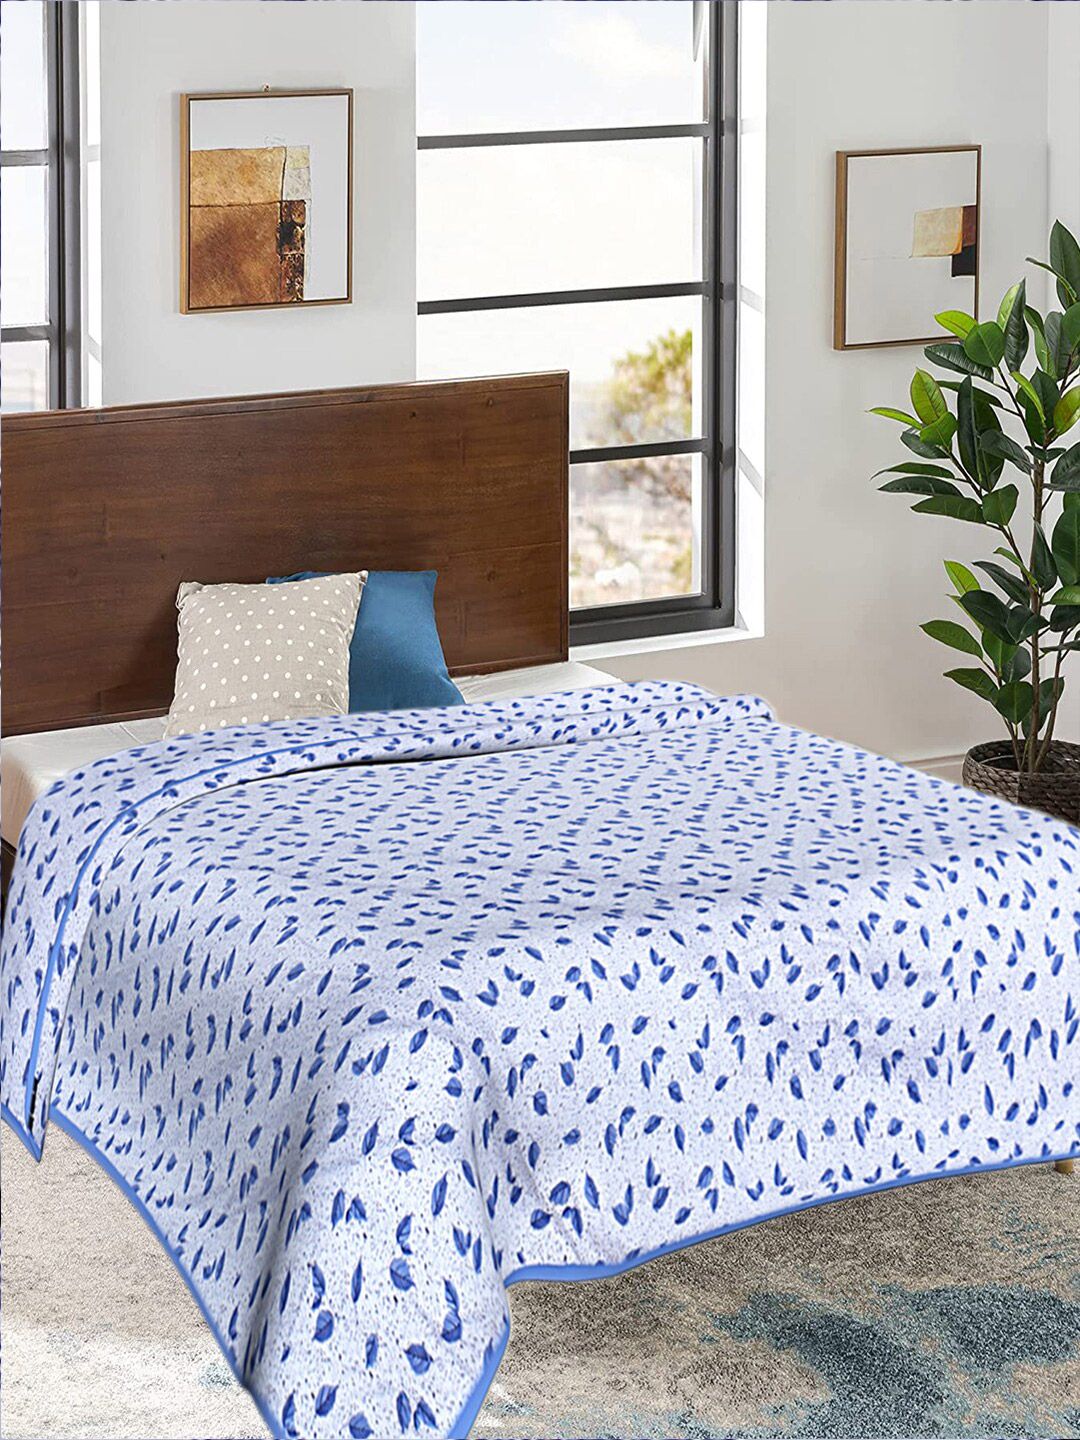 Kuber Industries White & Blue Ethnic Motifs AC Room 300 GSM Double Bed Blanket Price in India